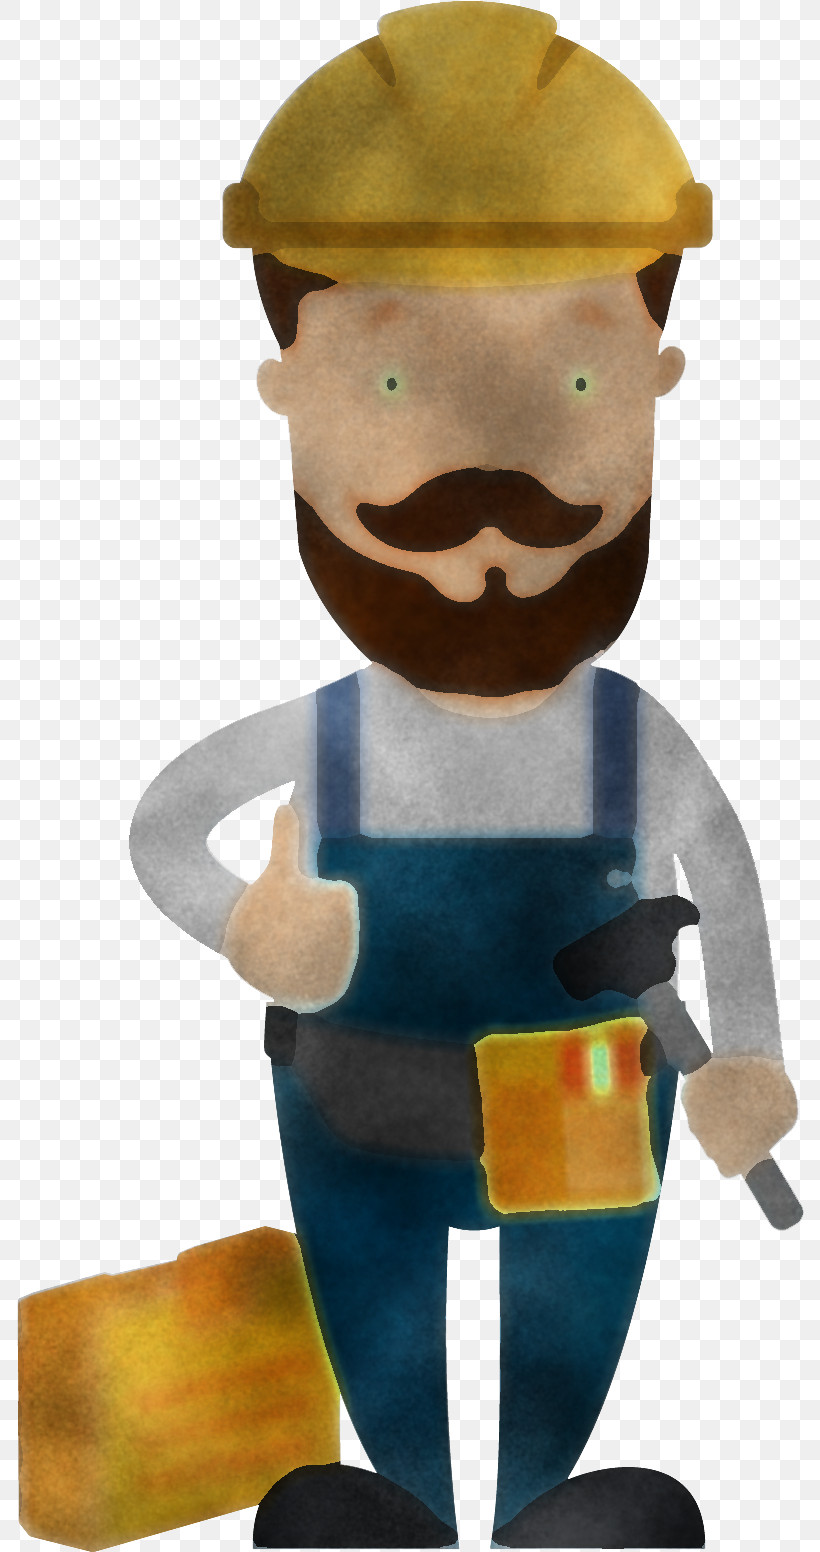 Cartoon Toy Figurine Animation Cook, PNG, 788x1552px, Cartoon, Animation, Cook, Figurine, Toy Download Free